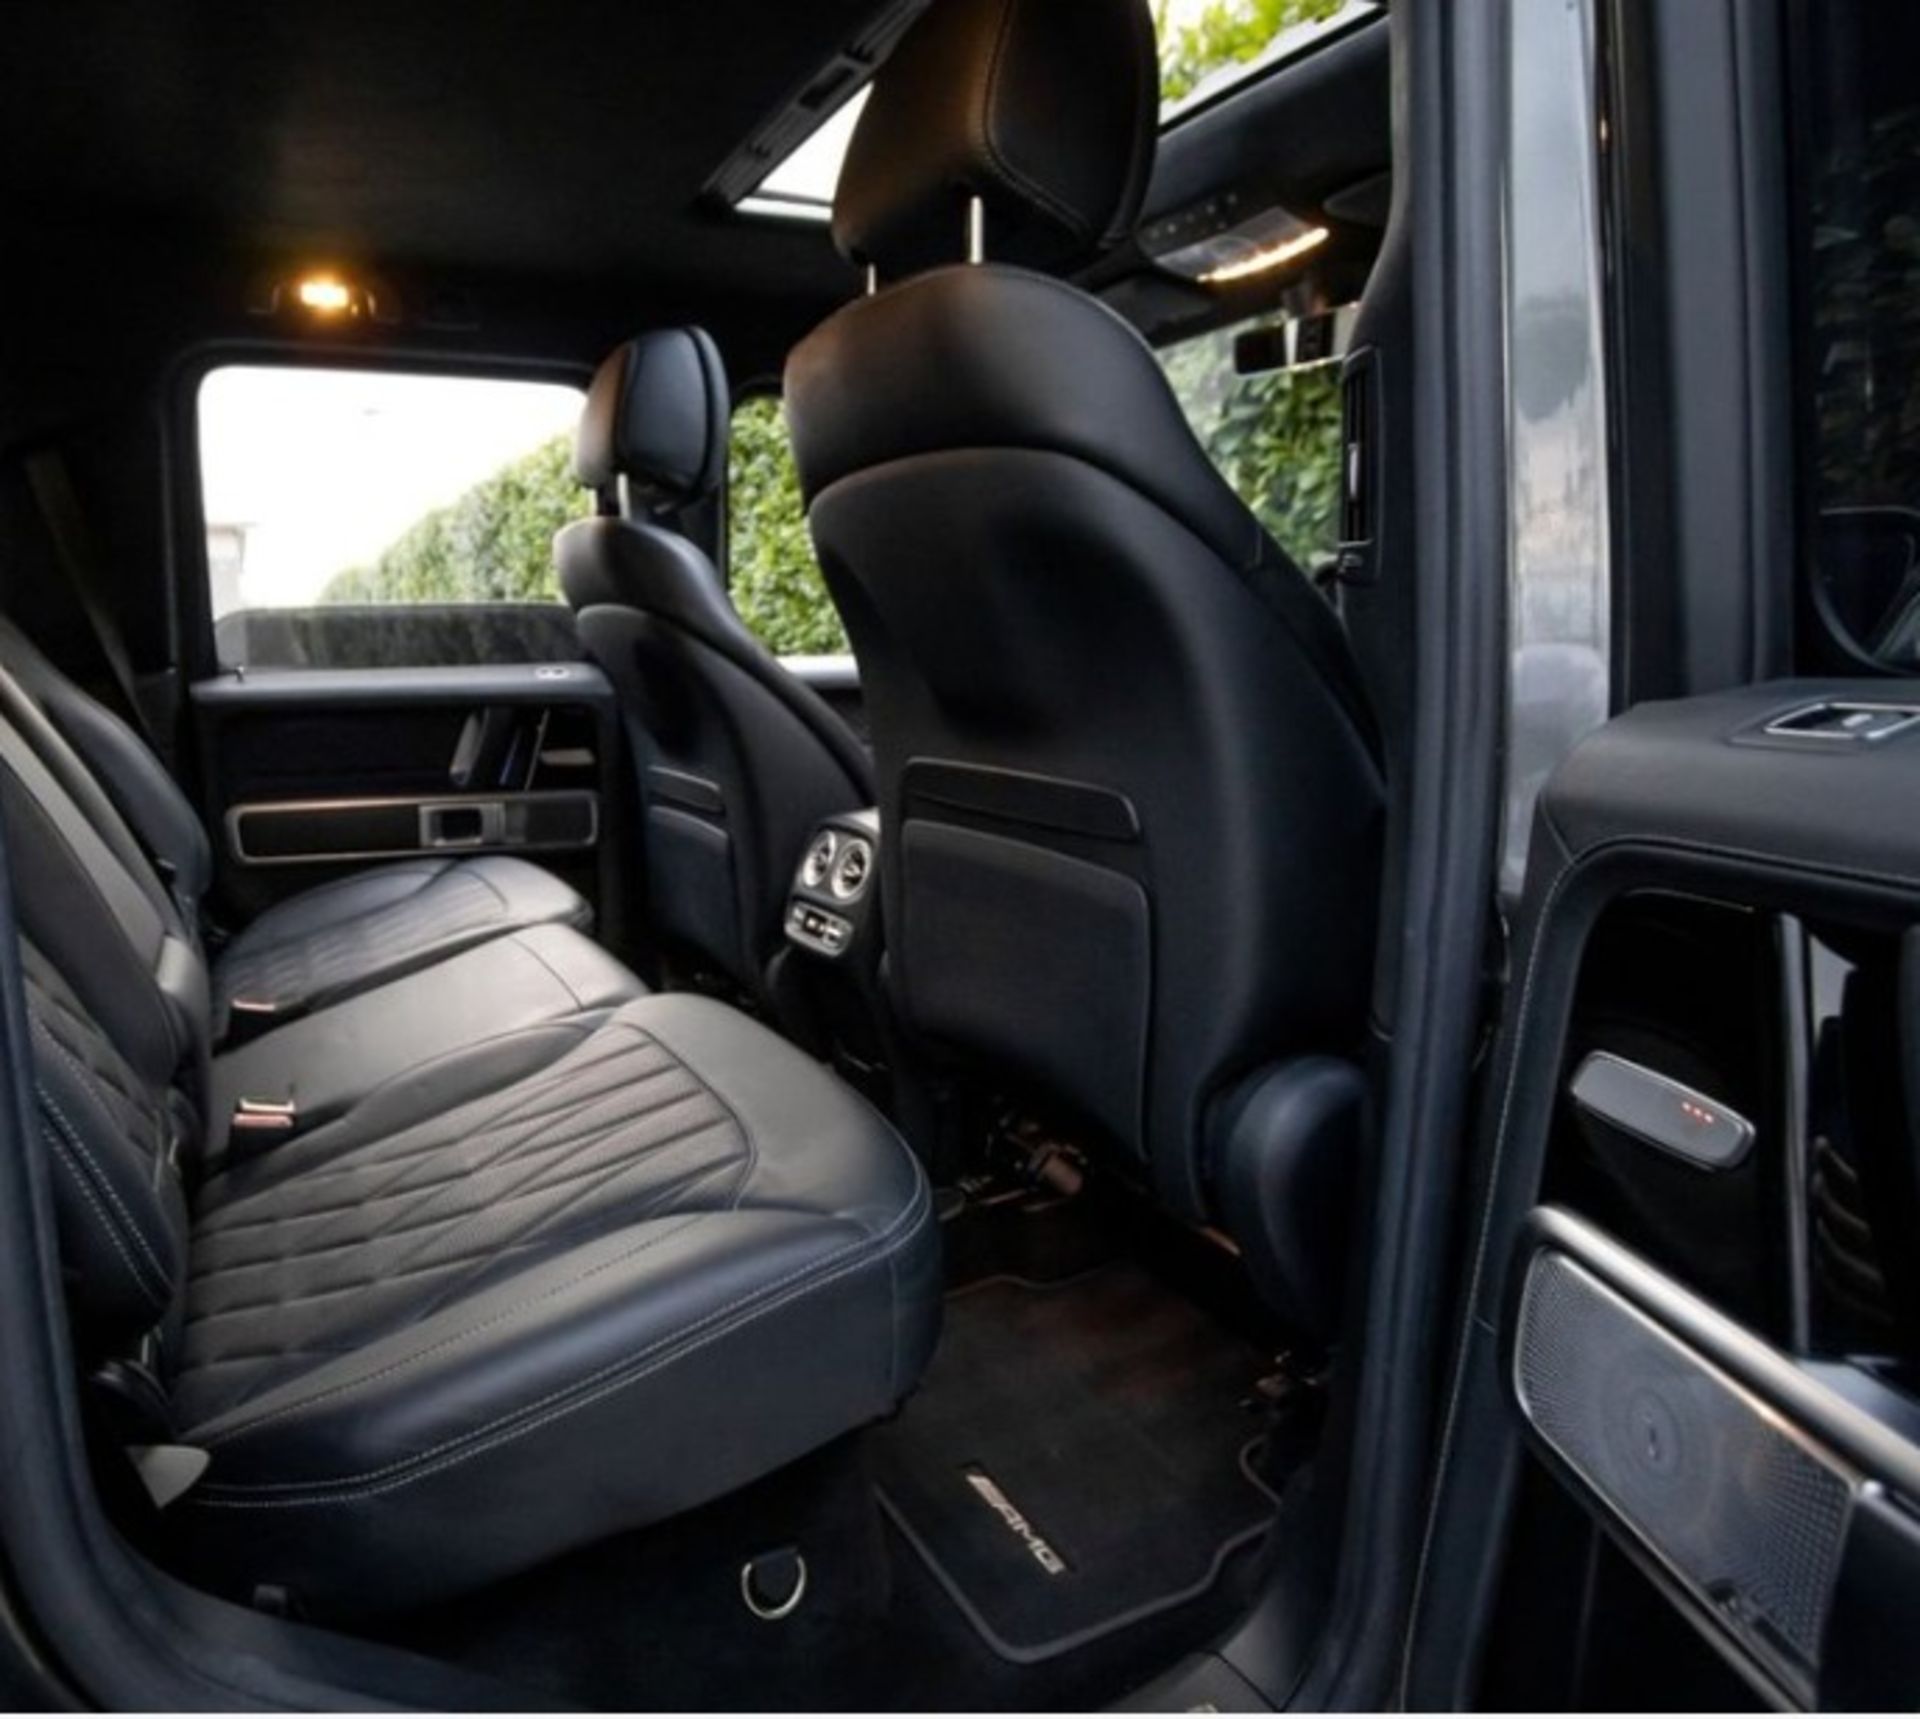 MERCEDES G63 BRABUS WIDE-STAR 800 STYLING GREY WITH BLACK LEATHER INTERIOR - Image 27 of 27